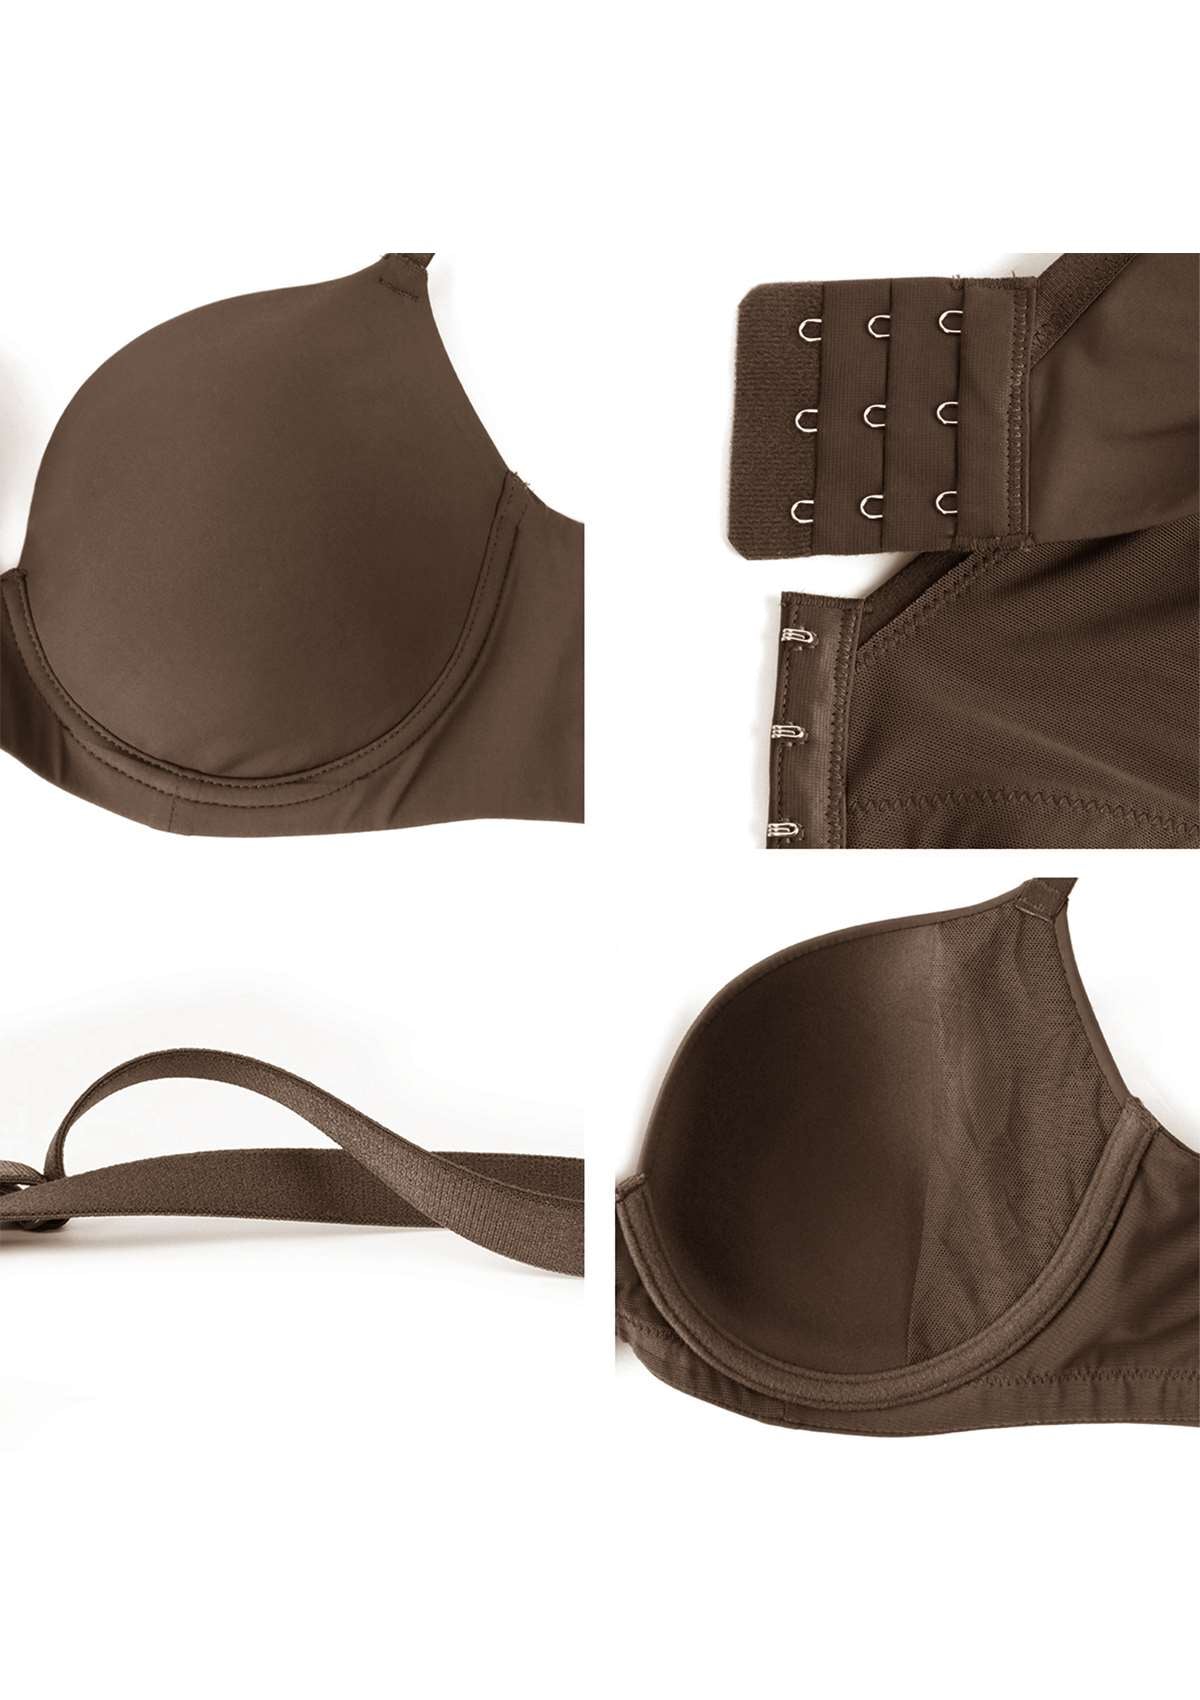 HSIA Gemma Smooth Supportive Padded T-shirt Bra - For Full Figures - Cocoa Brown / 40 / C